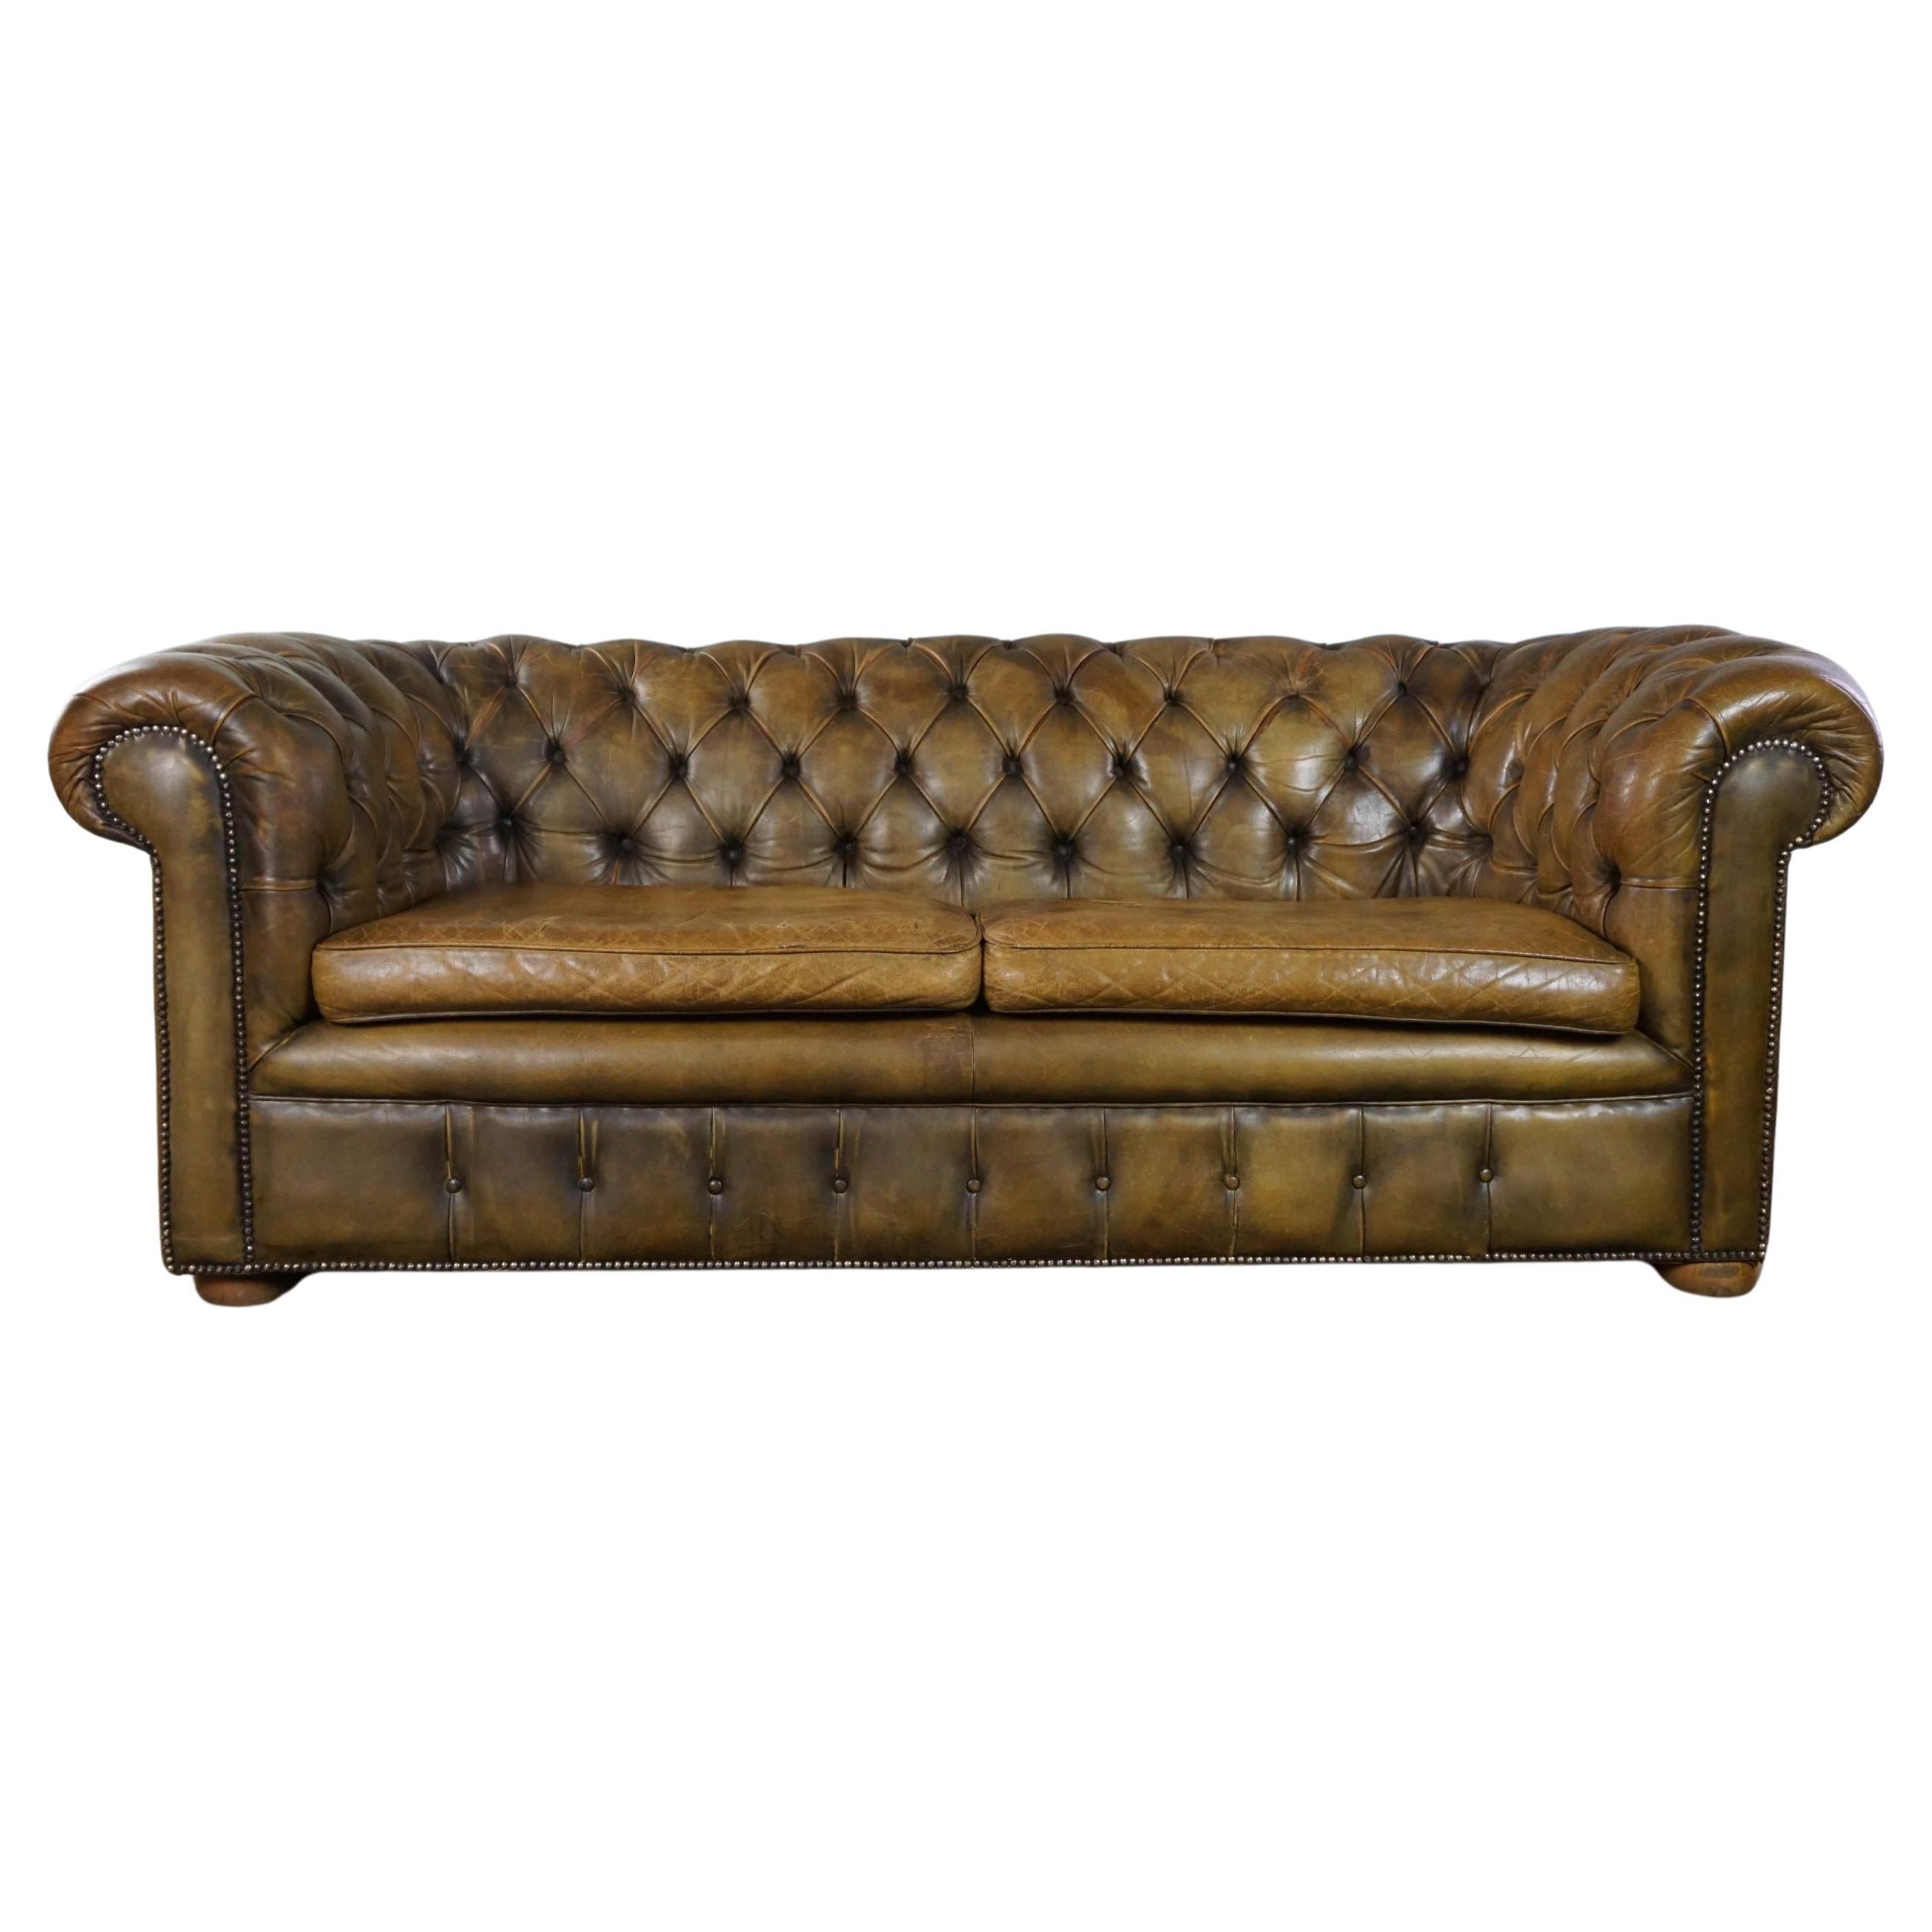 Super sturdy 2.5-seater chesterfield sofa in a beautiful moss green color For Sale